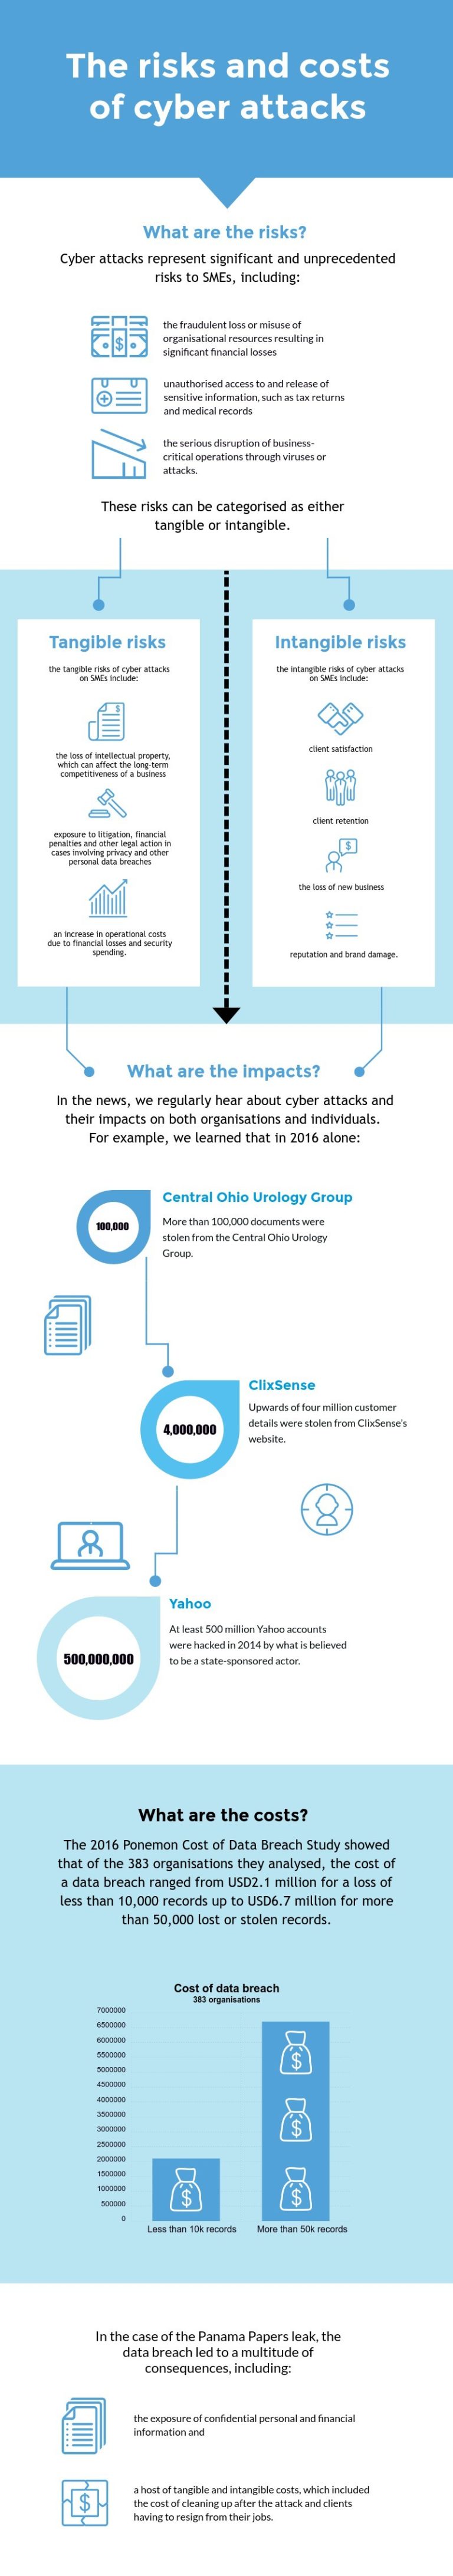 Infographic on Cyber attacks